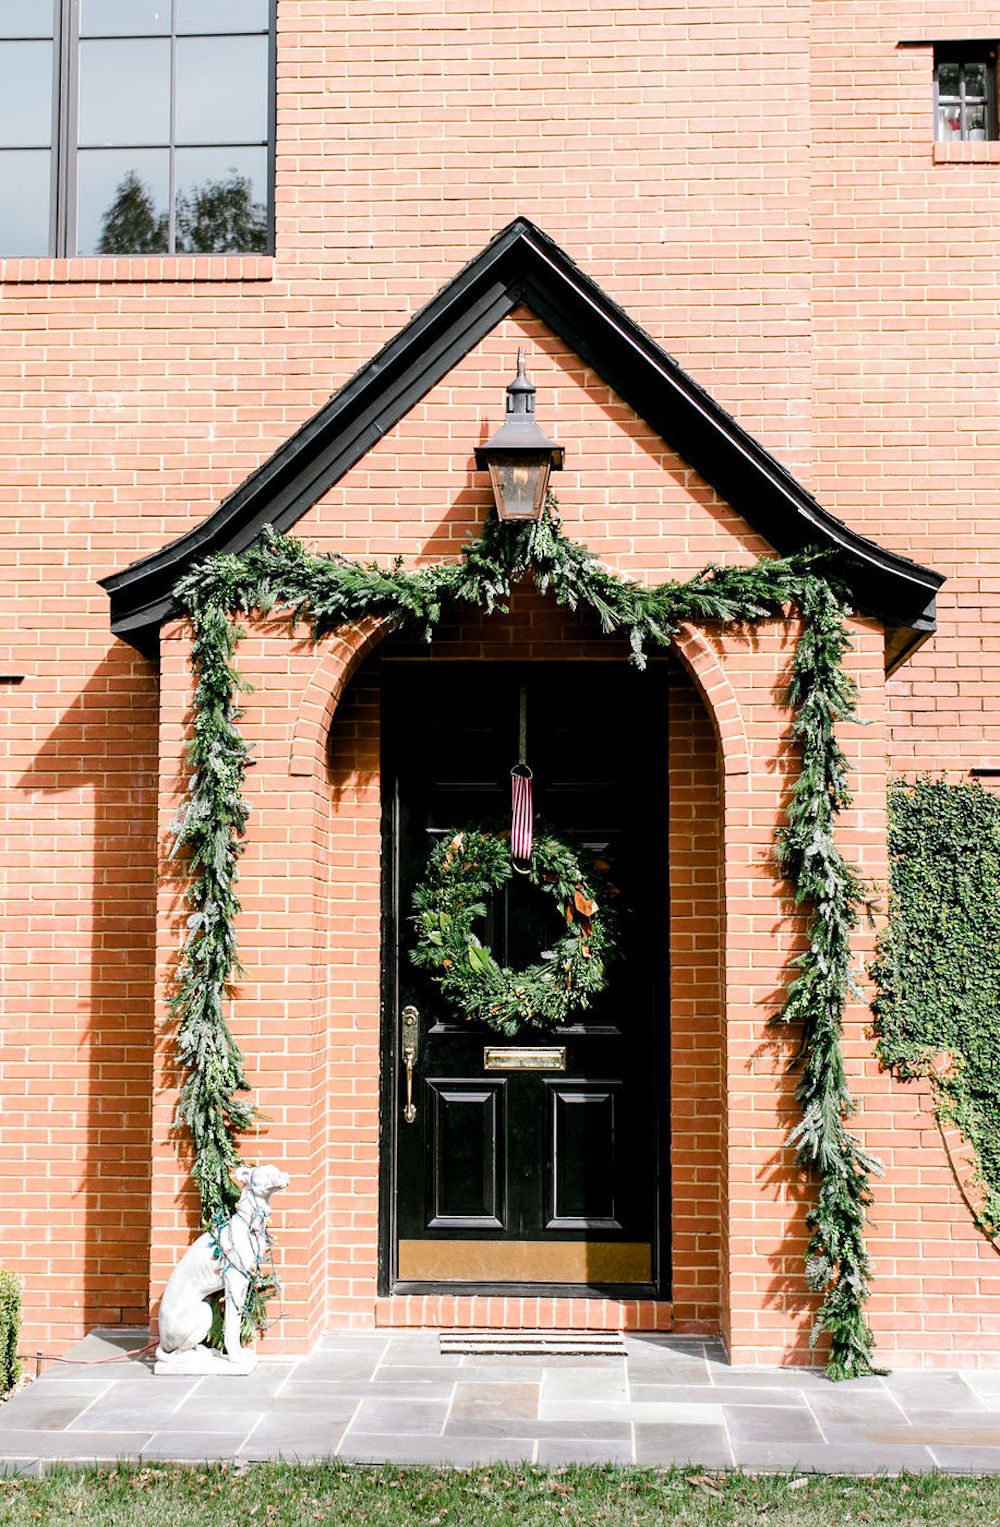 Classic brick home exterior decked out for the holidays